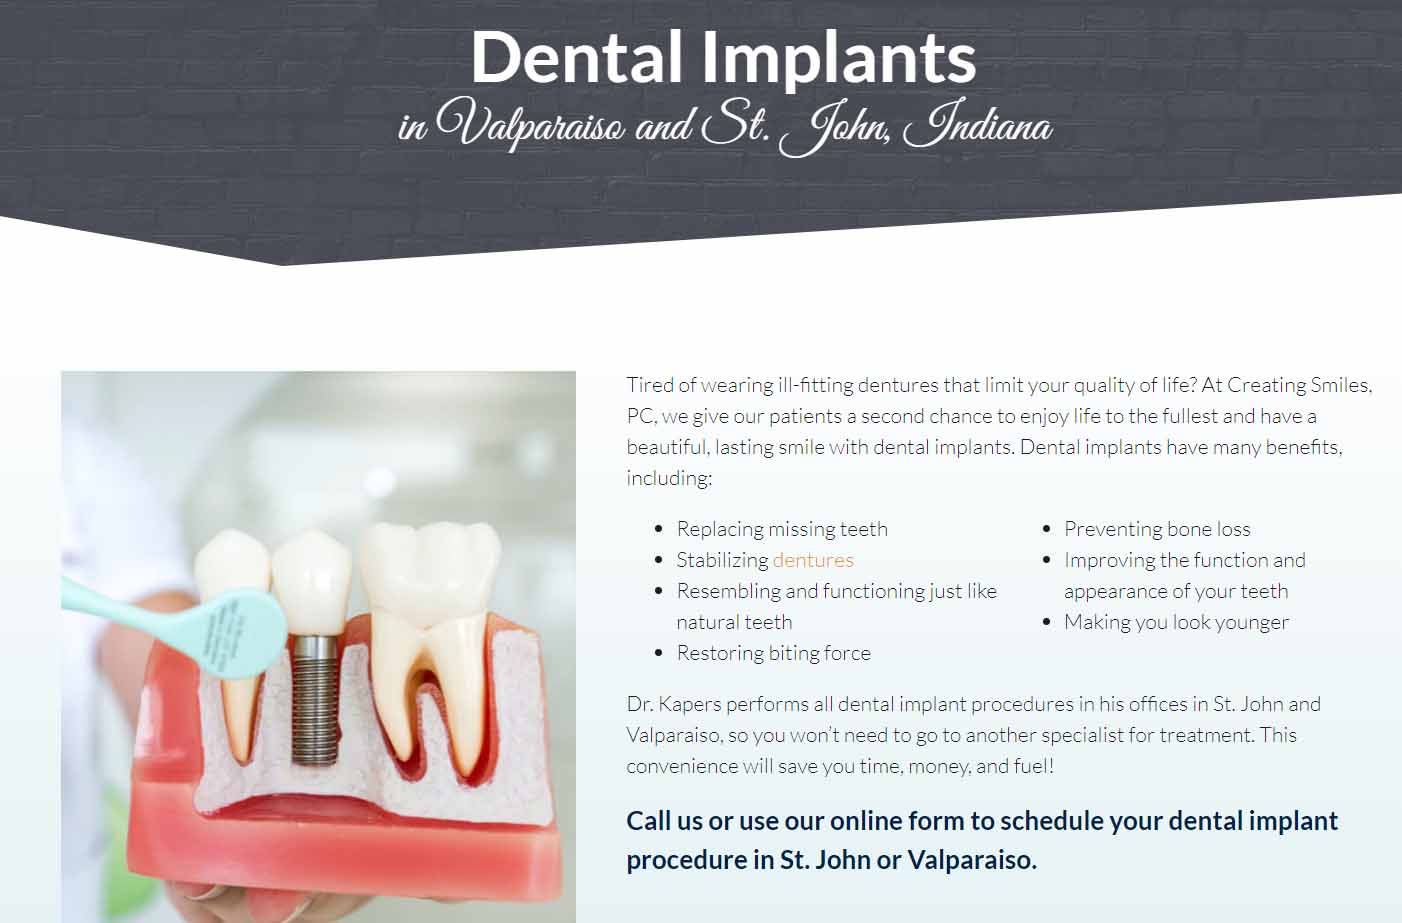 Web page about dental implants.